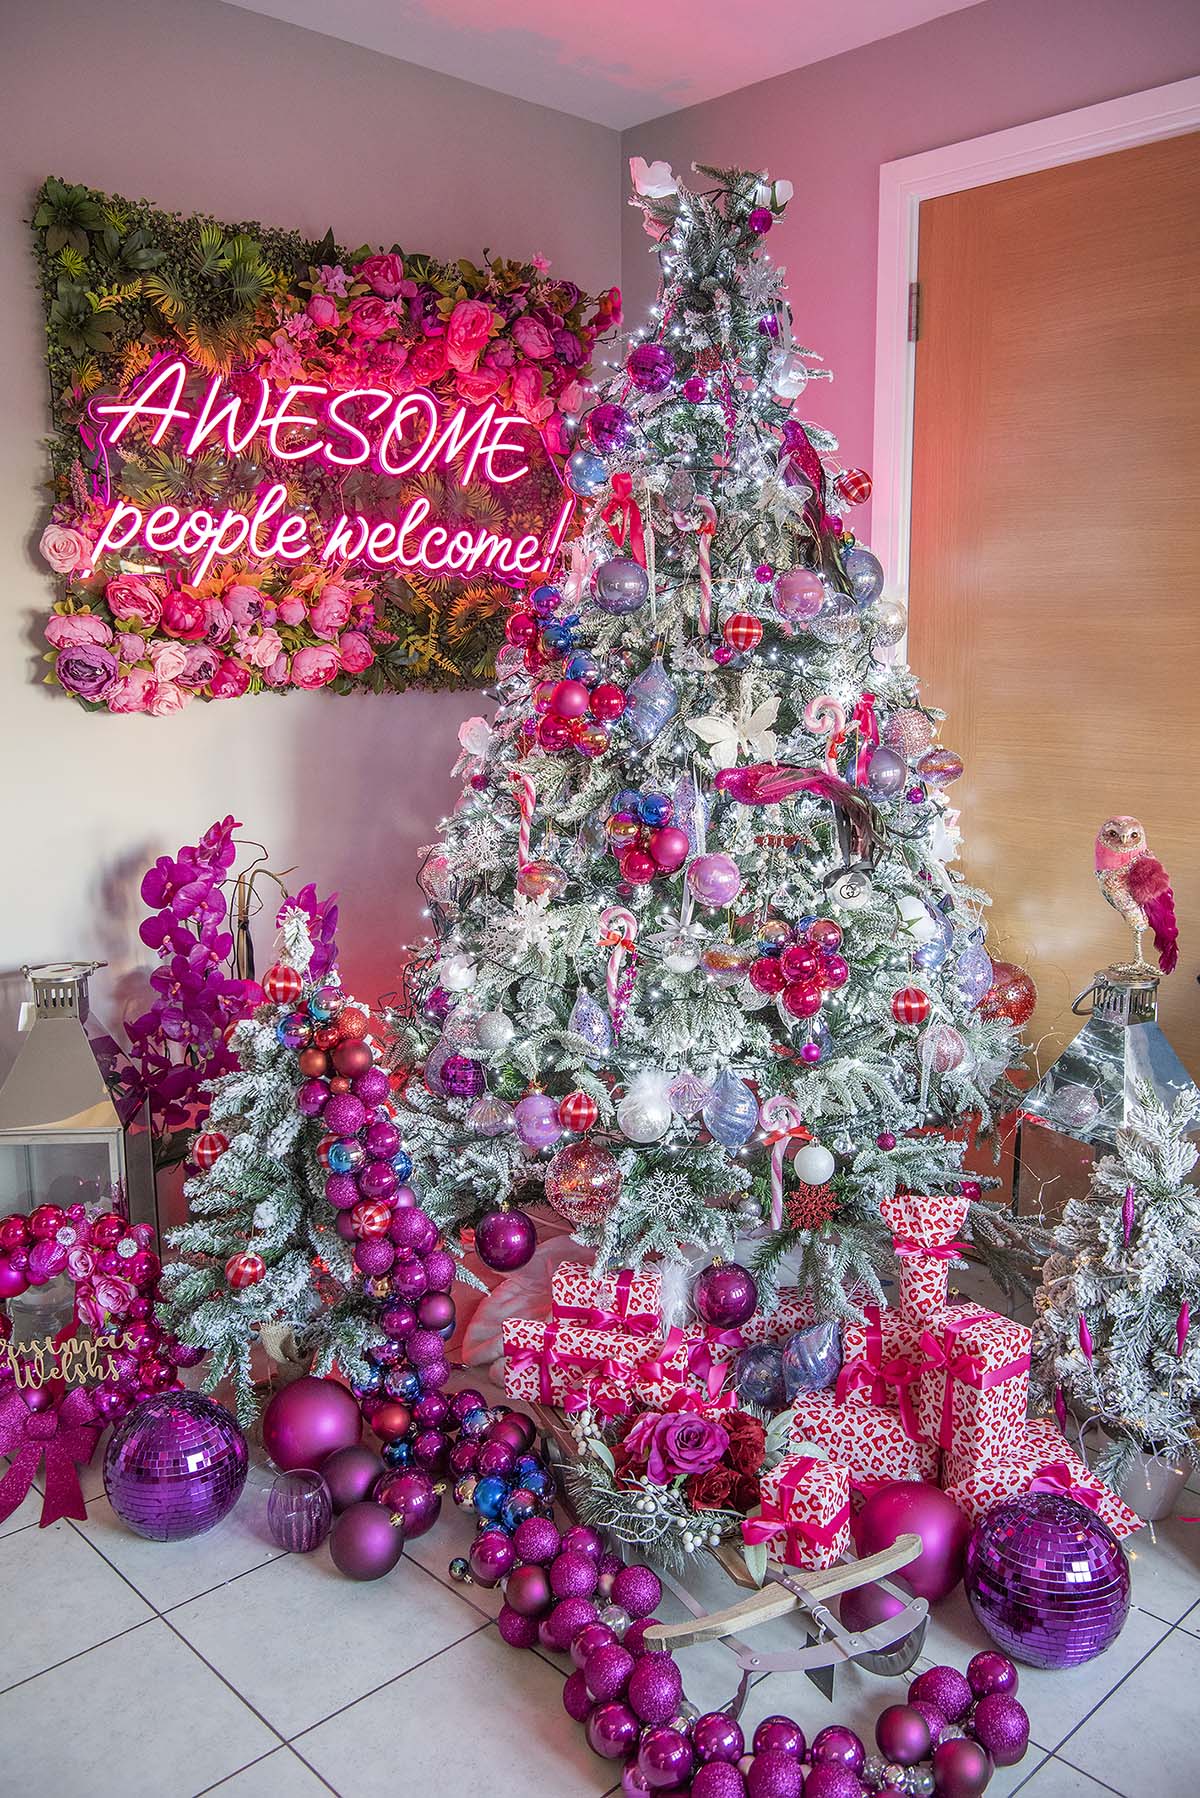 A Christmas tree decorated with pink and silver, standing in front of a pink neon light